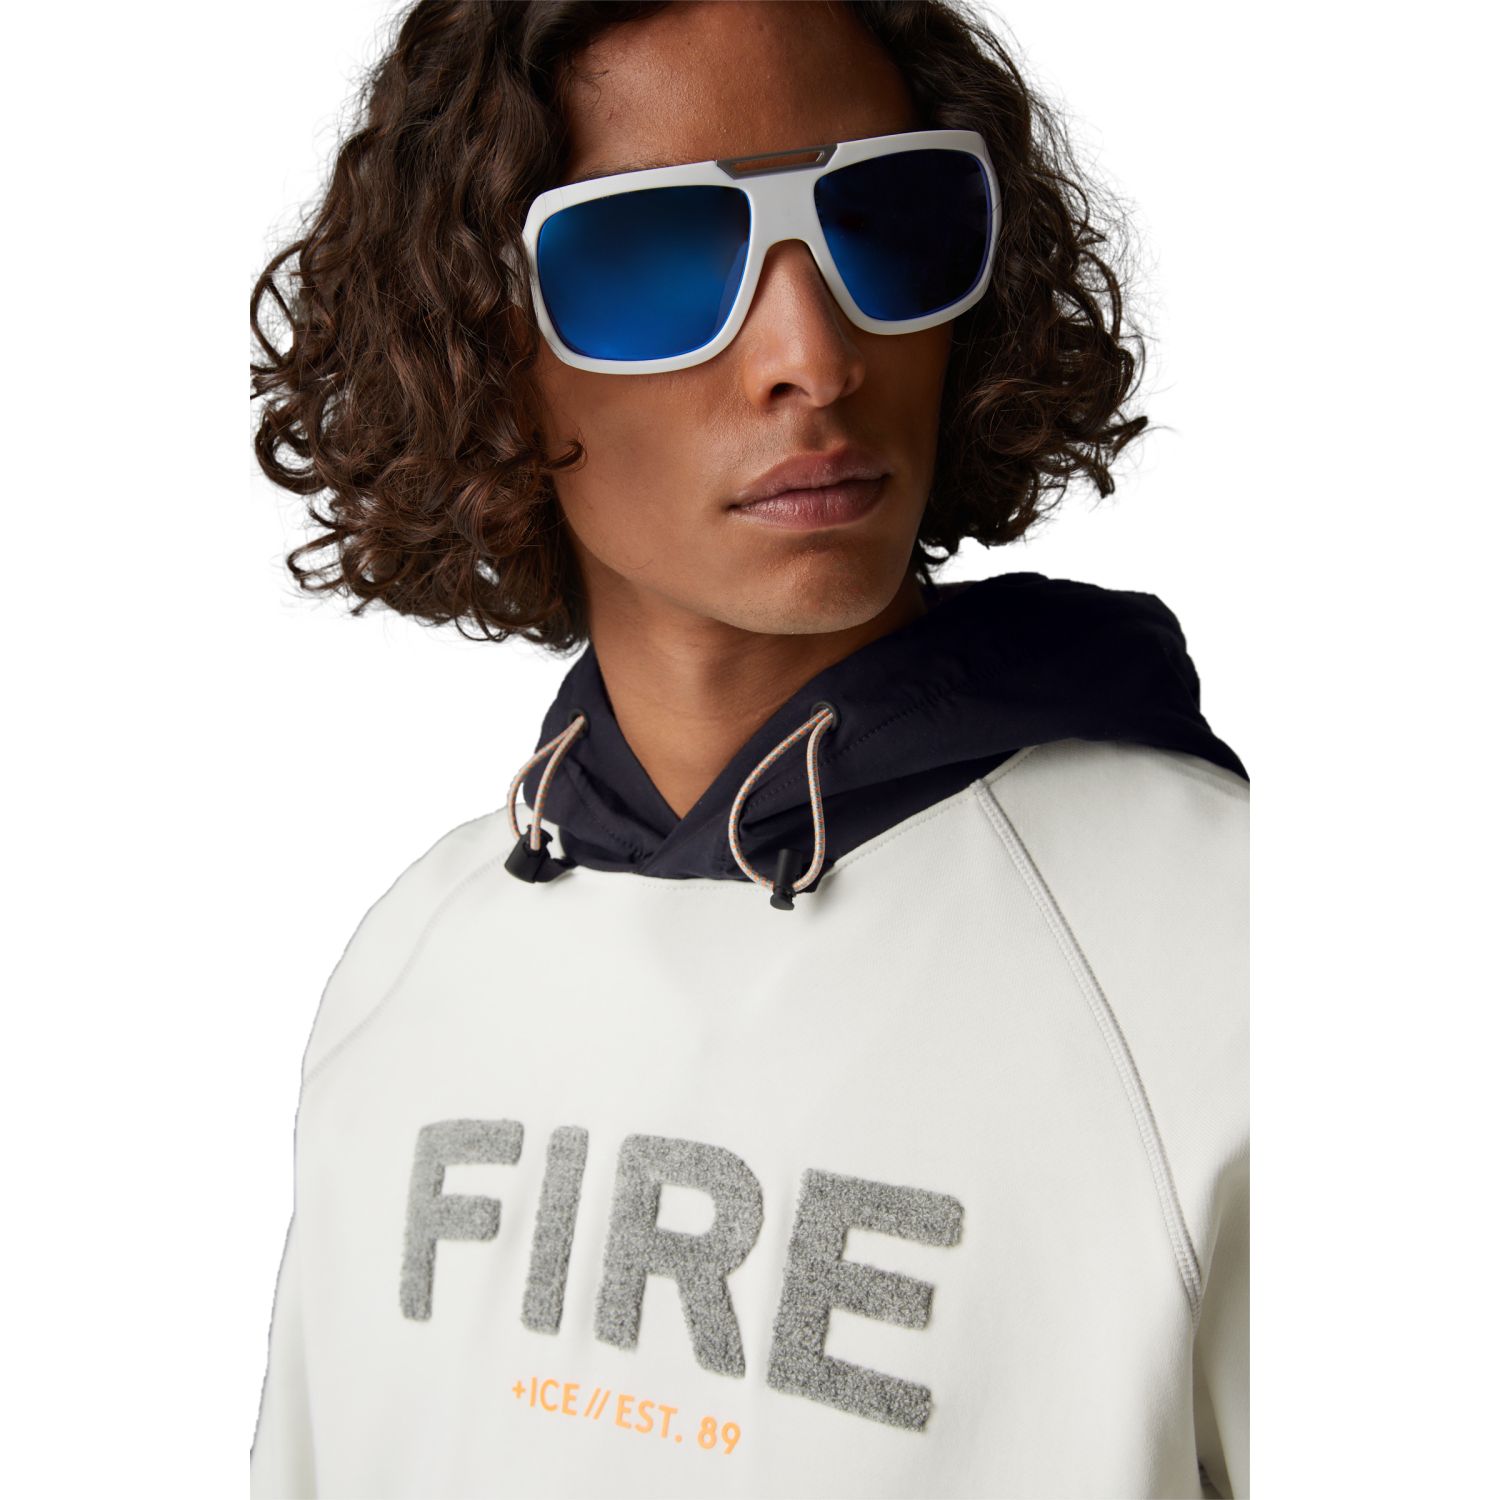 Hanorace & Pulovere -  bogner fire and ice VALLE Hoodie